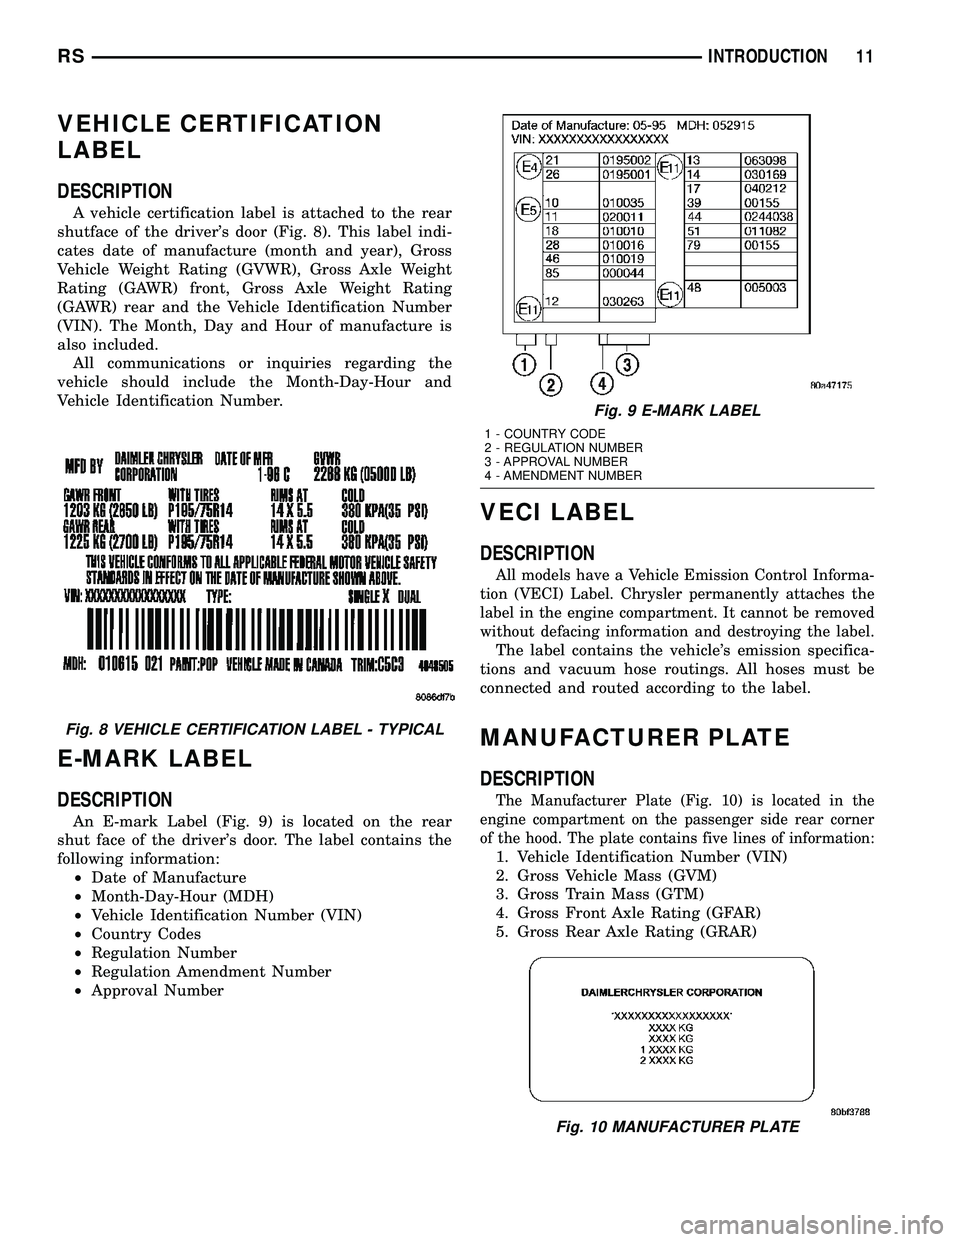 DODGE TOWN AND COUNTRY 2004 User Guide VEHICLE CERTIFICATION
LABEL
DESCRIPTION
A vehicle certification label is attached to the rear
shutface of the drivers door (Fig. 8). This label indi-
cates date of manufacture (month and year), Gross